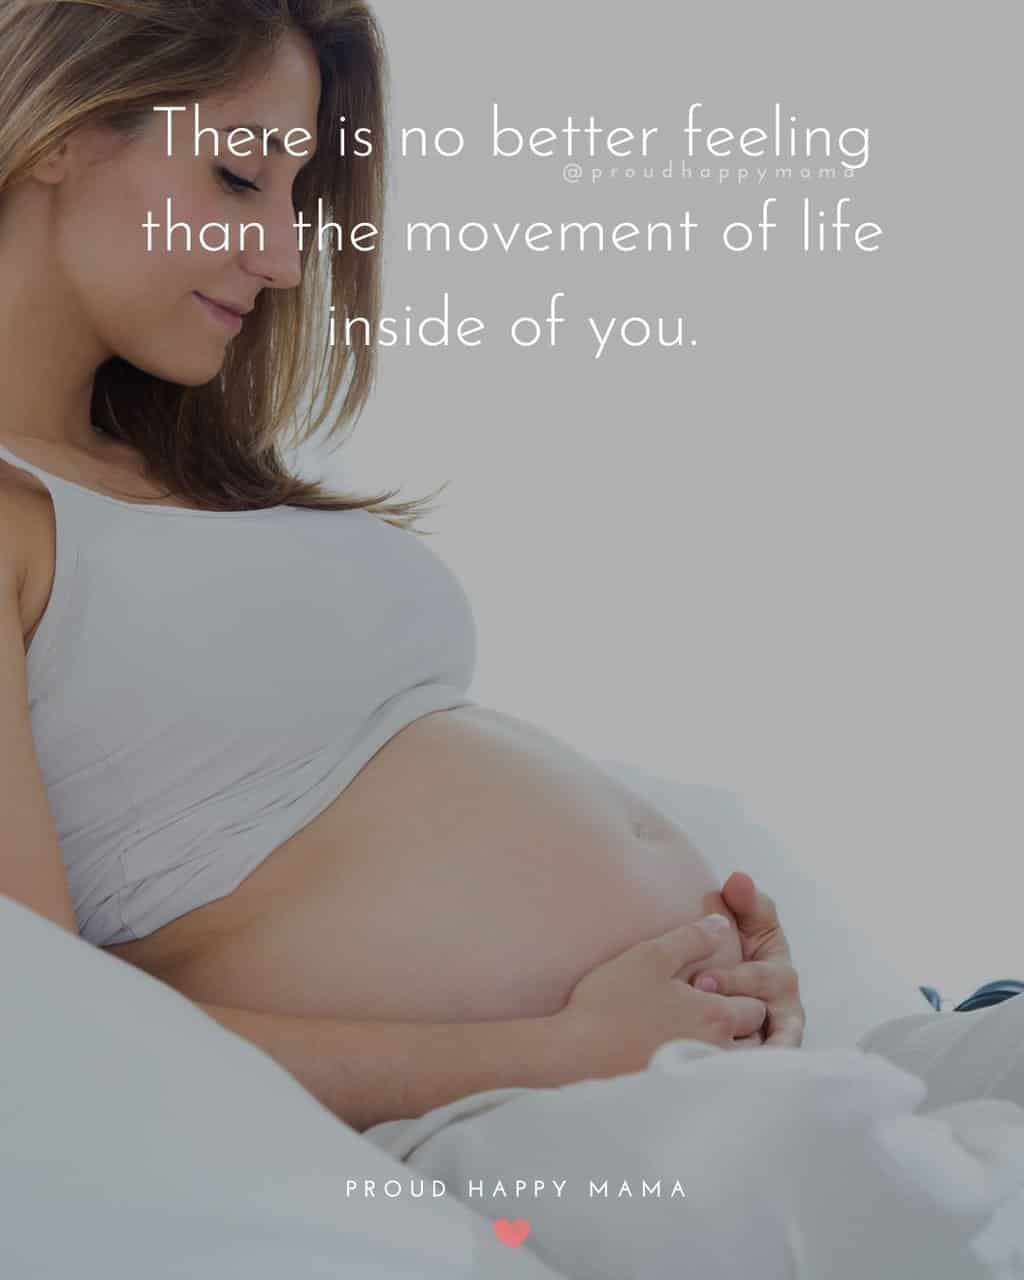 Im Pregnant Quotes | There is no better feeling than the movement of life inside of you.